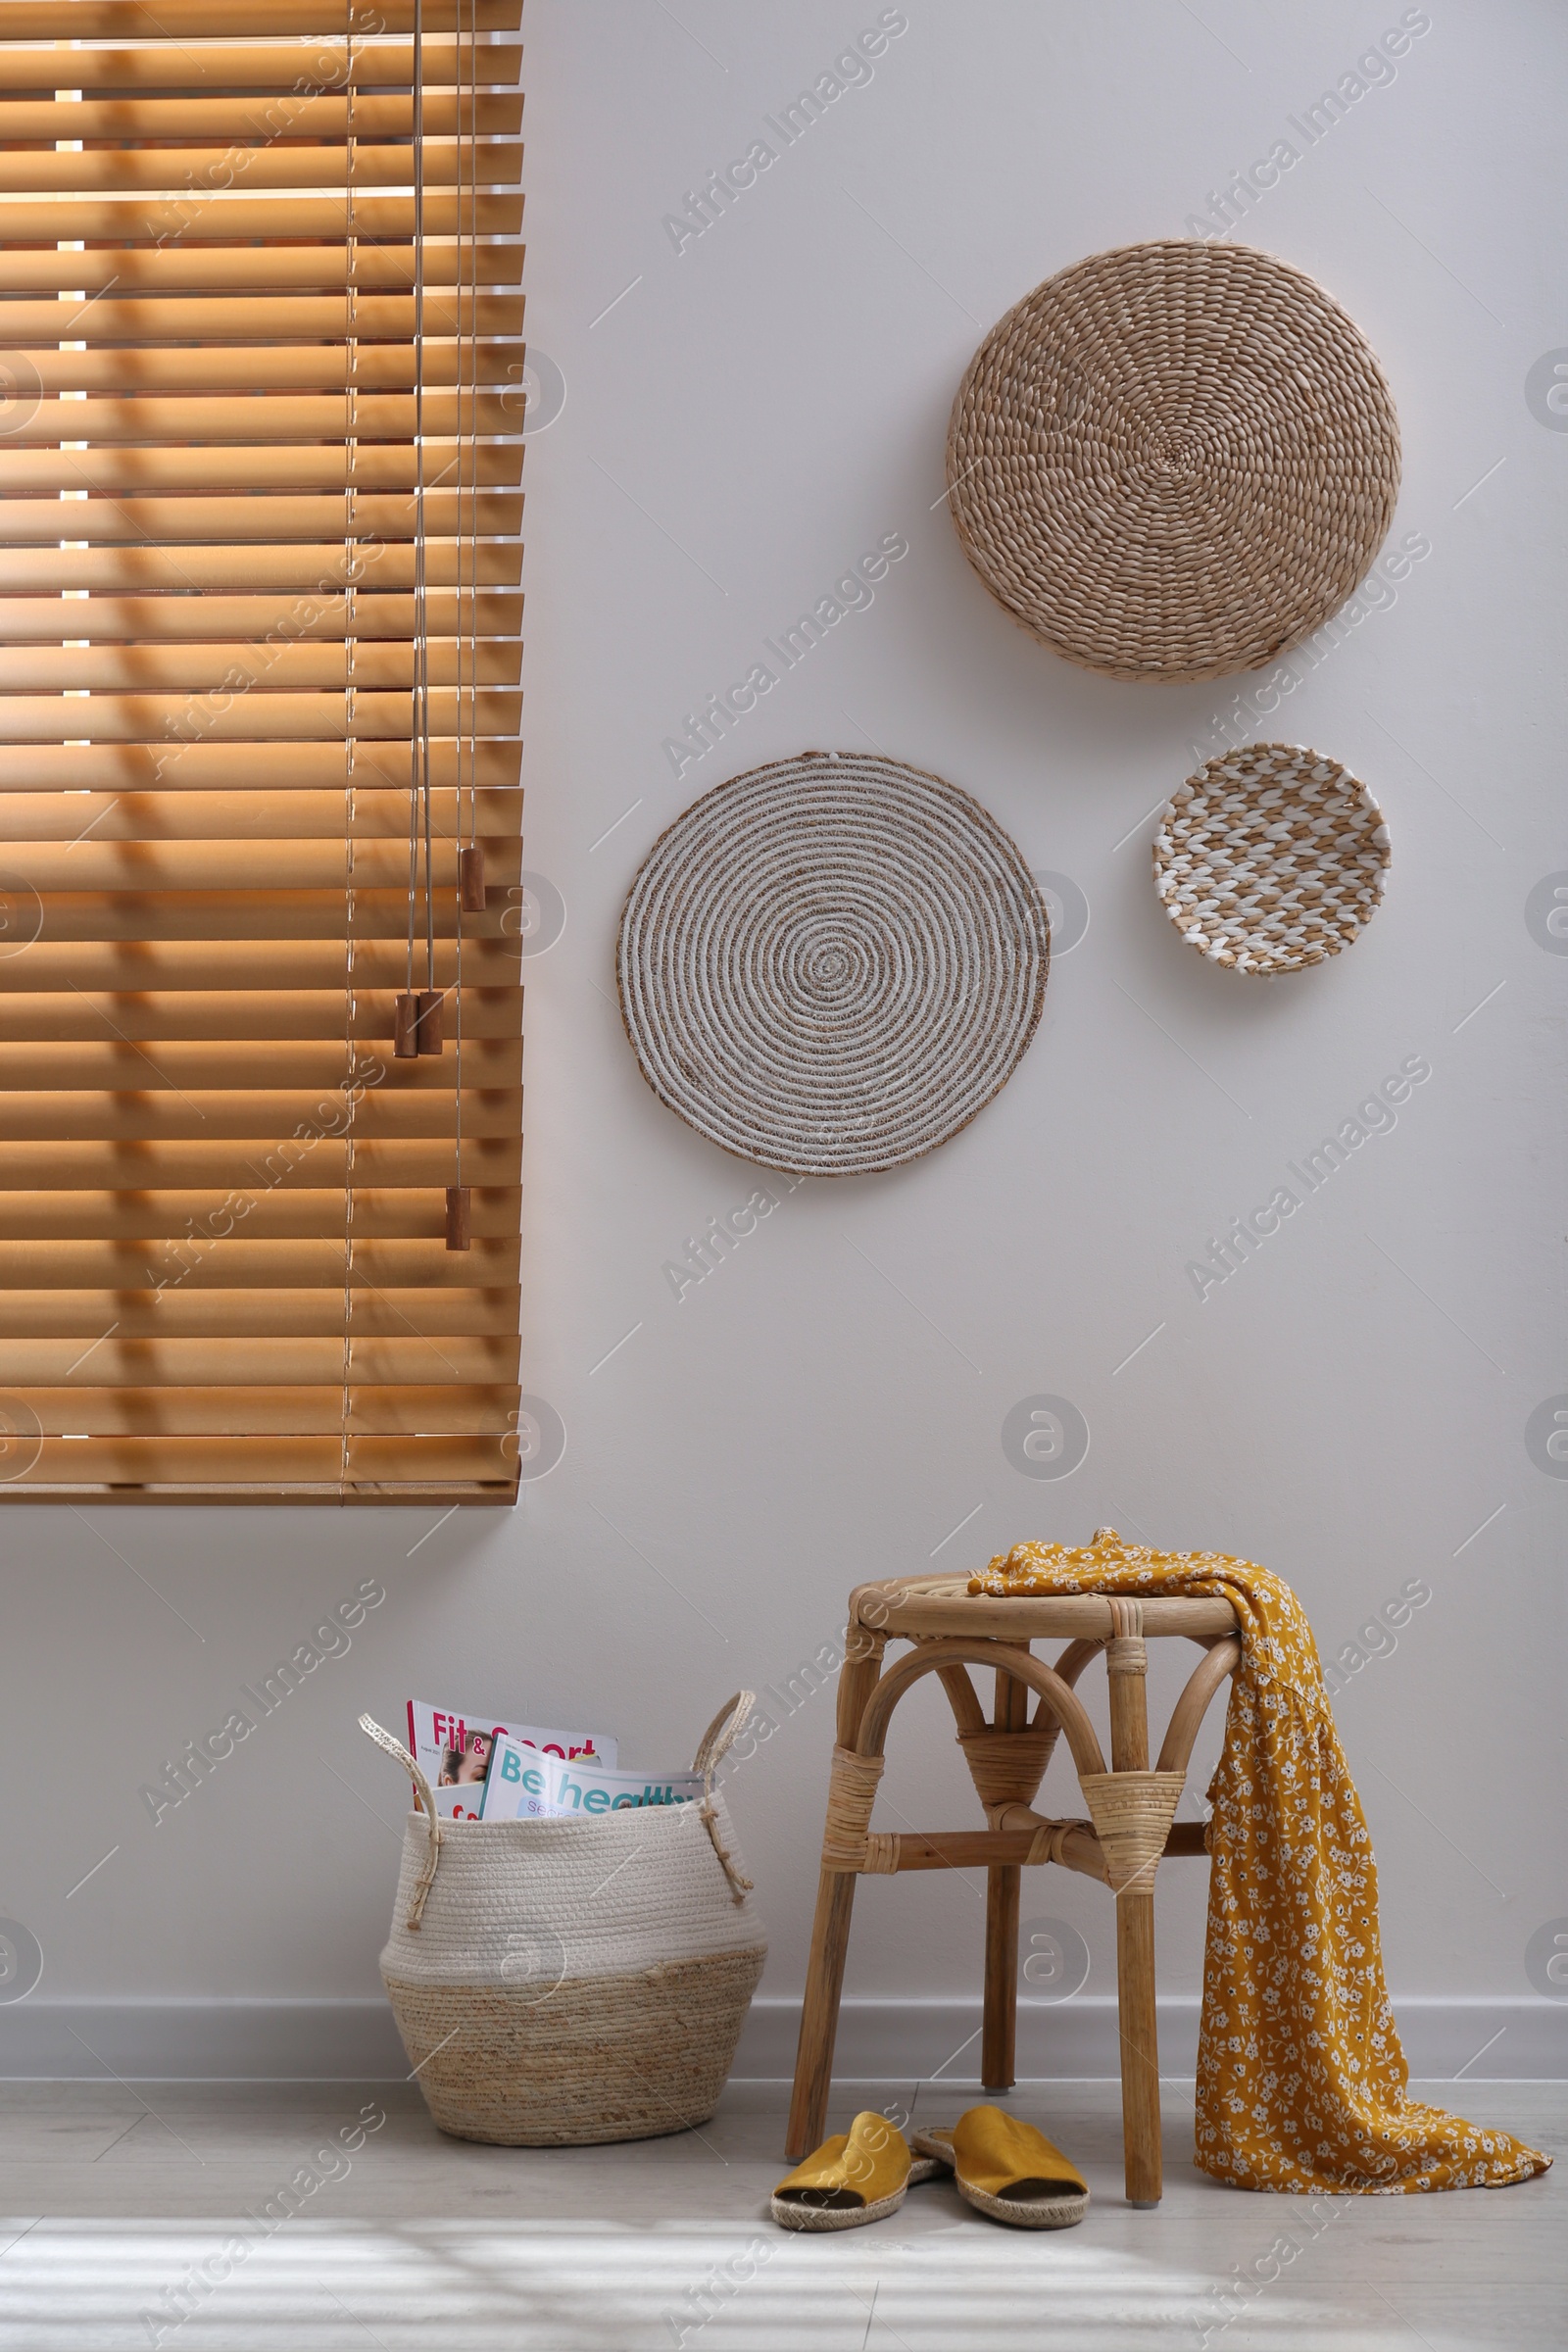 Photo of Wooden stool with dress and wicker basket near light  grey wall indoors. Interior accessories